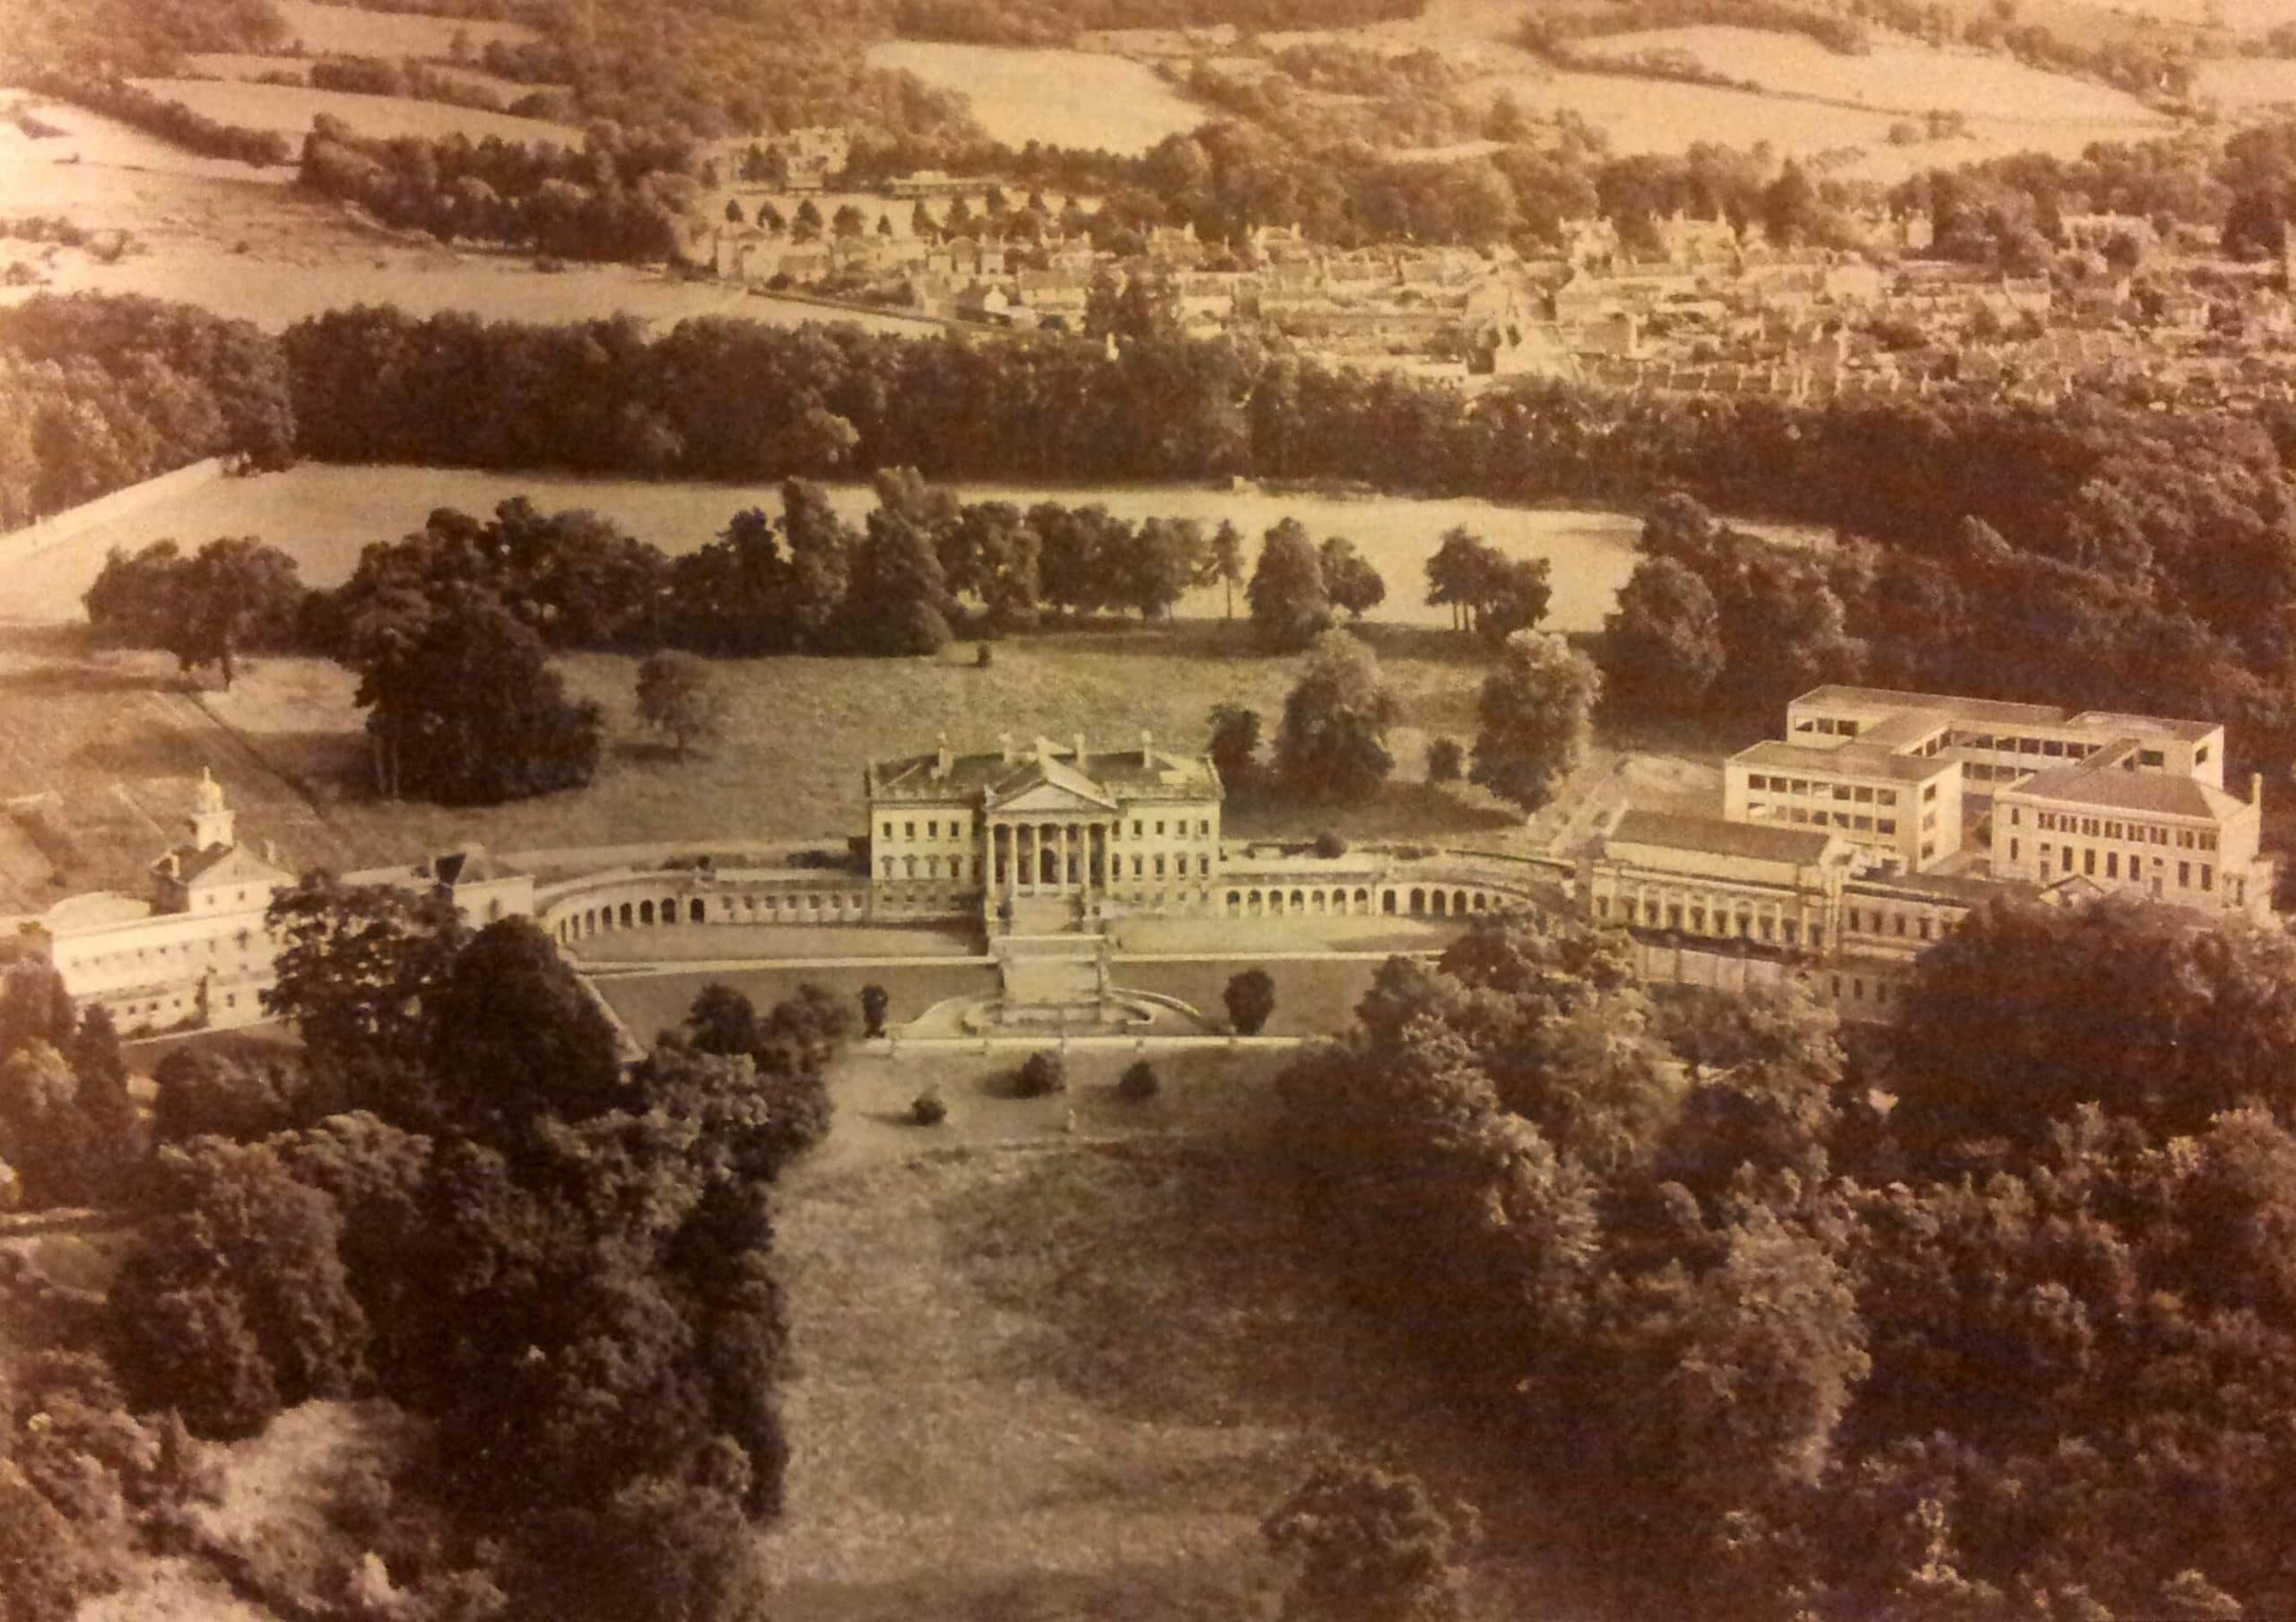 Prior Park from the air about 1960